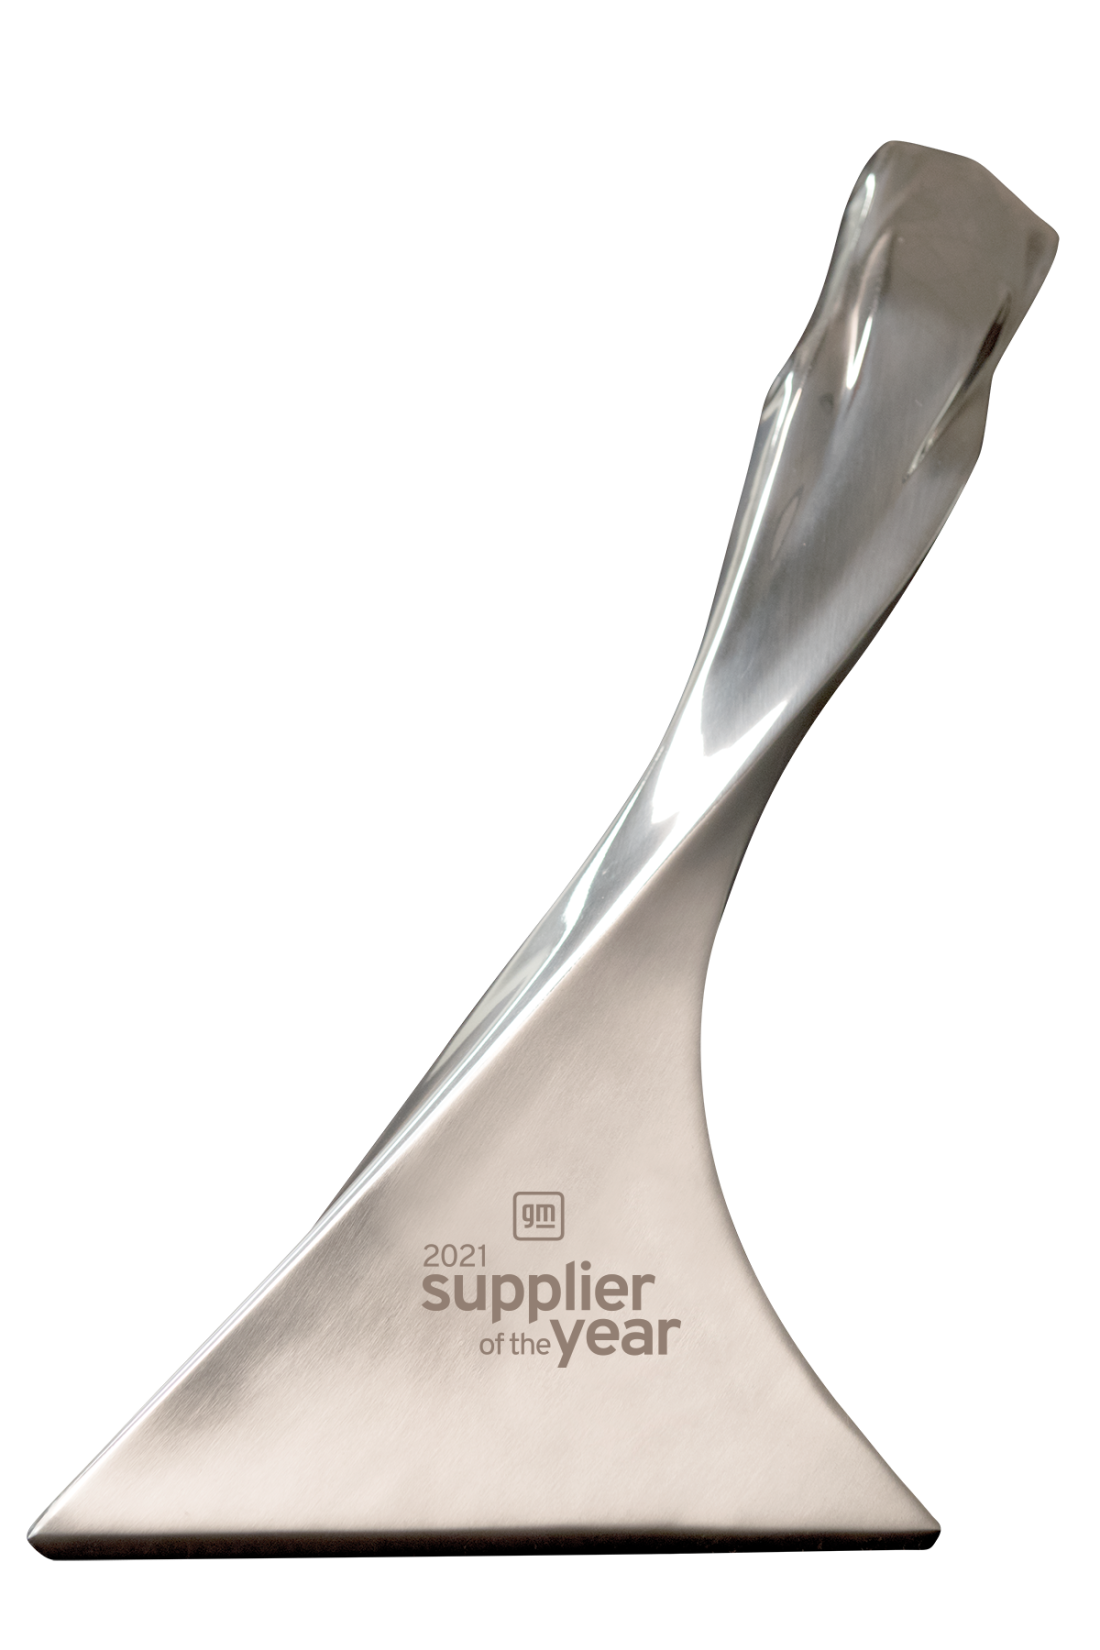 GM 2021 Supplier of the Year Award